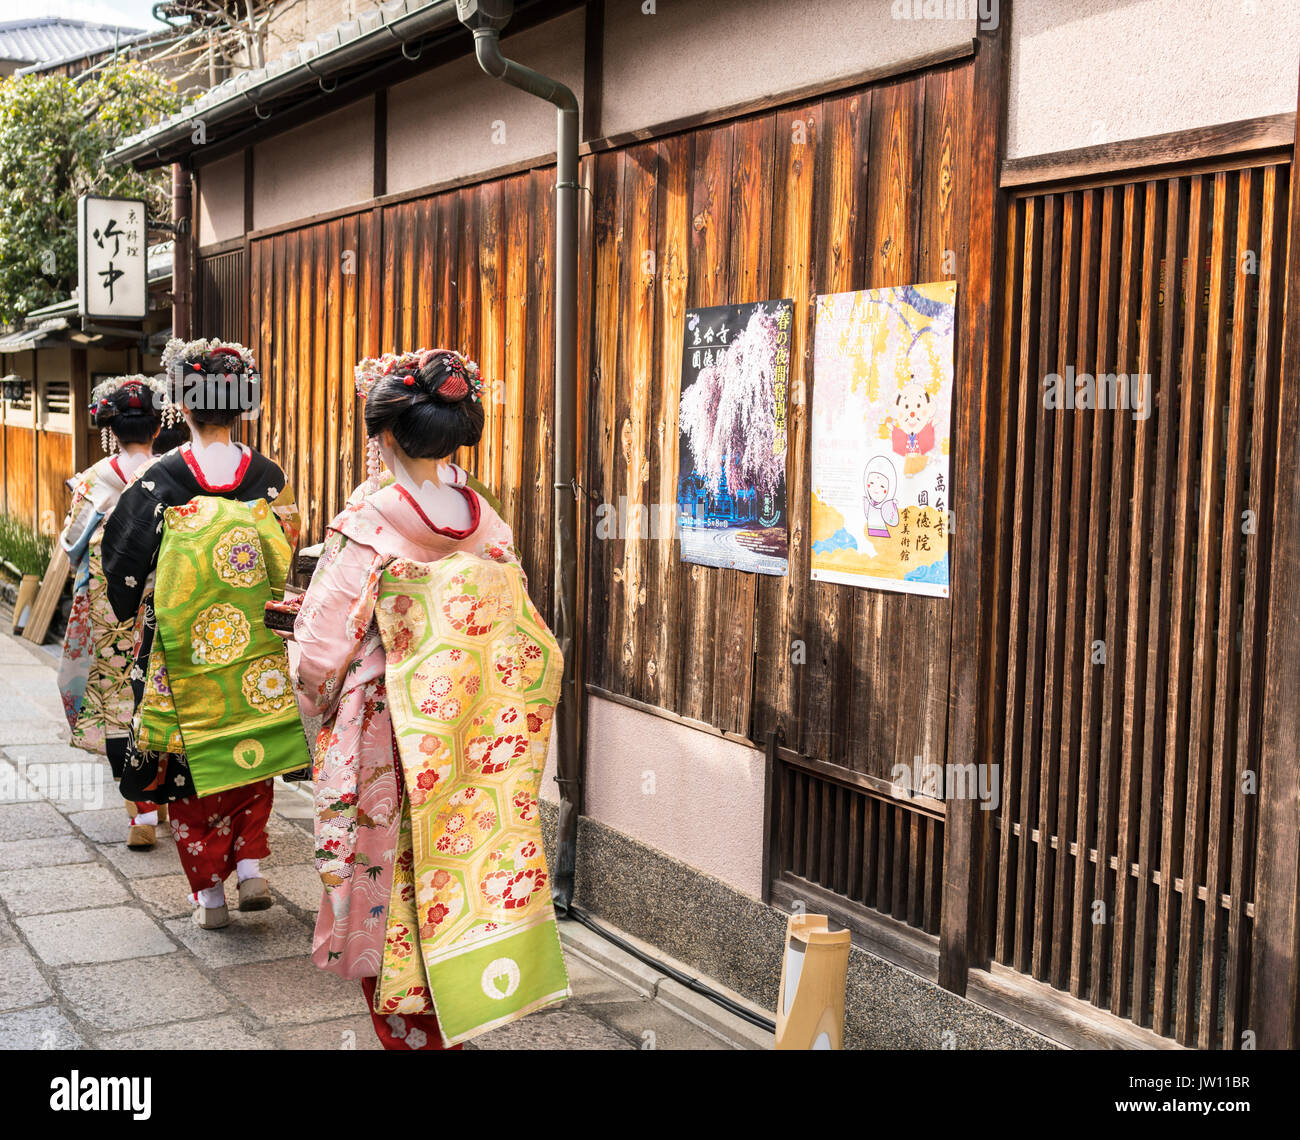 Group of three Geisha walking, in a traditional Kyoto street in Japan Stock Photo